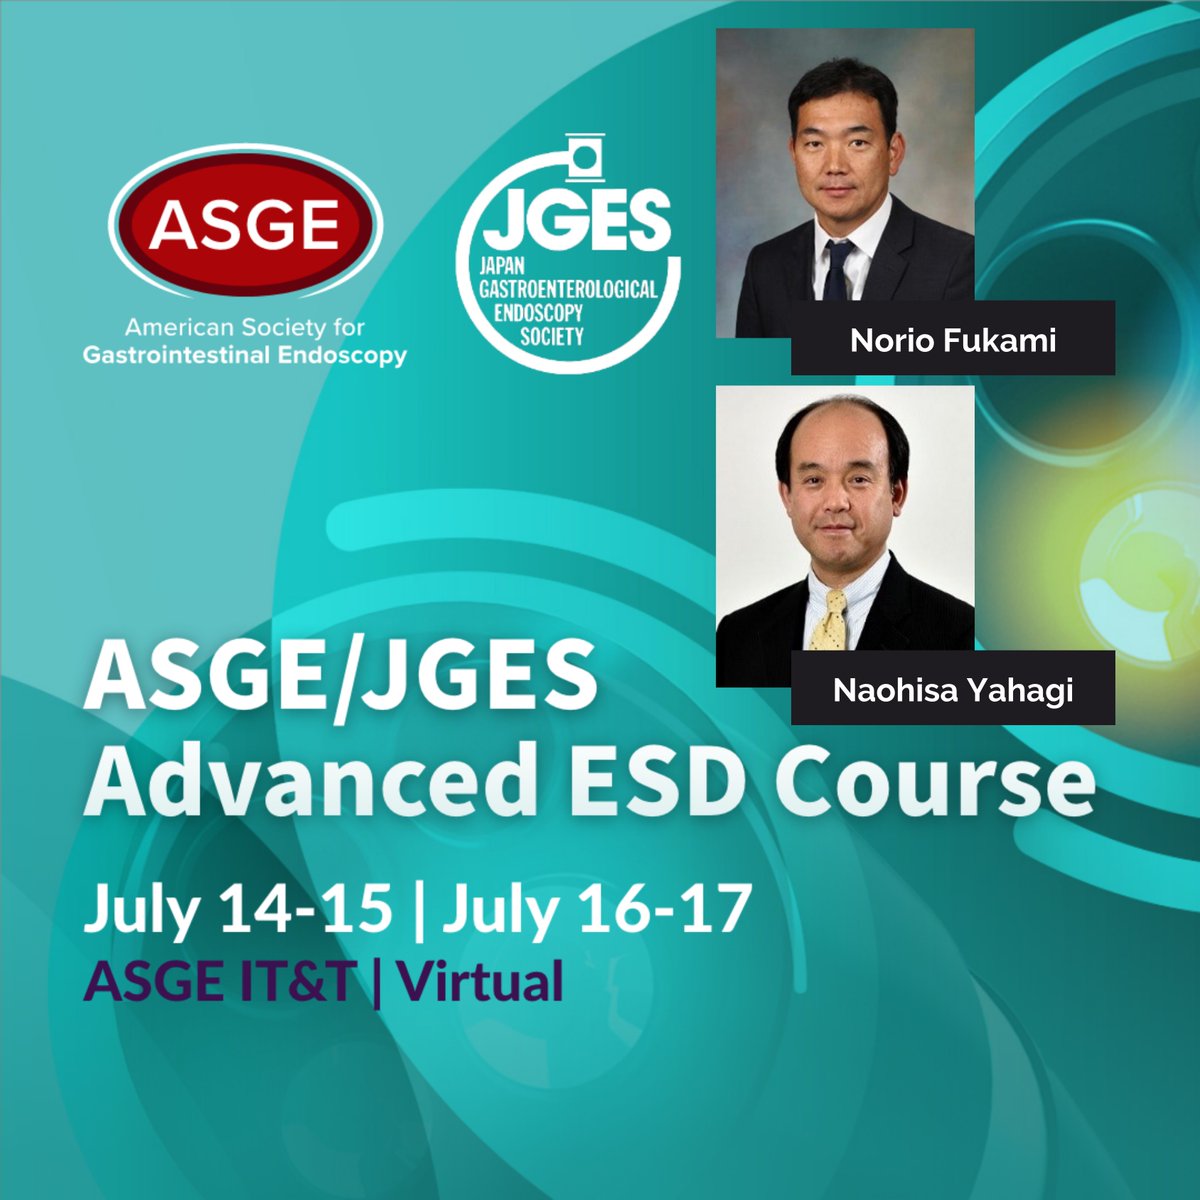 Elevate your ESD knowledge with hands-on learning from the masters in ex vivo and animate models at the ASGE/JGES Advanced ESD Course, July 14-15 and July 16-17 in-person or virtually. Reserve your spot now at ASGE.org/Calendar so you don't miss out! #GITwitter #Endoscopy